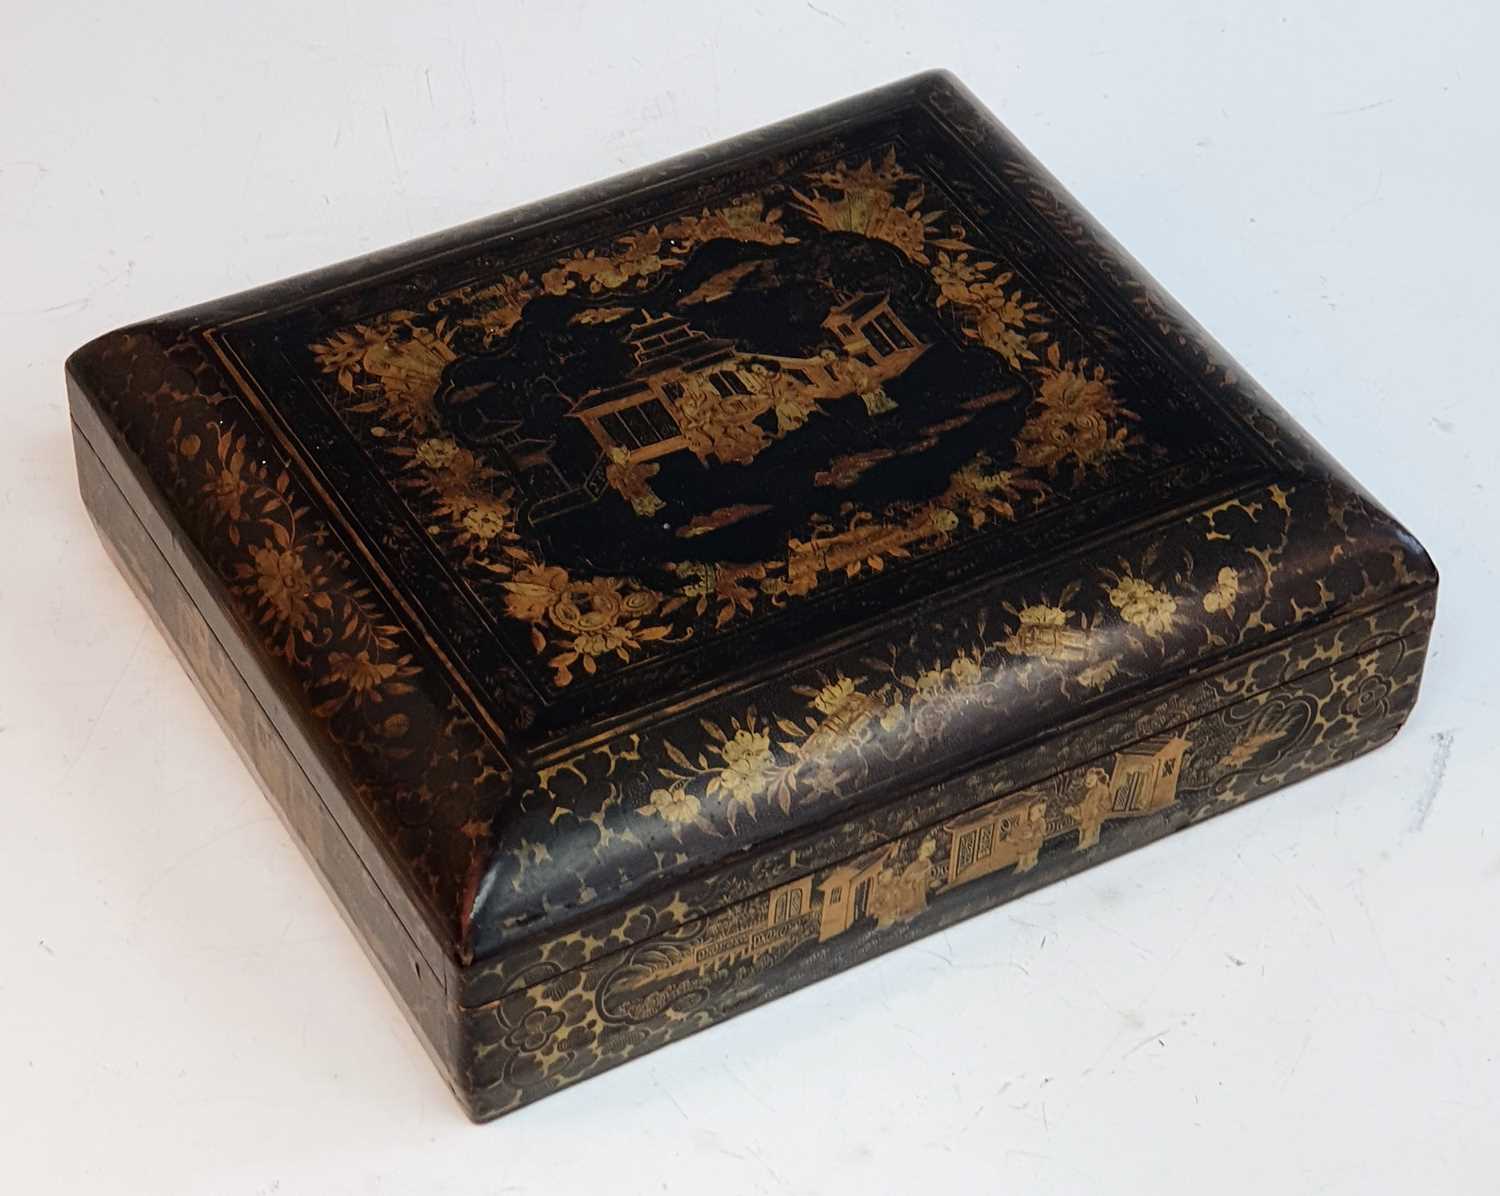 A 19th century Chinese lacquered games box, the lid decorated with figures before a pagoda lifting